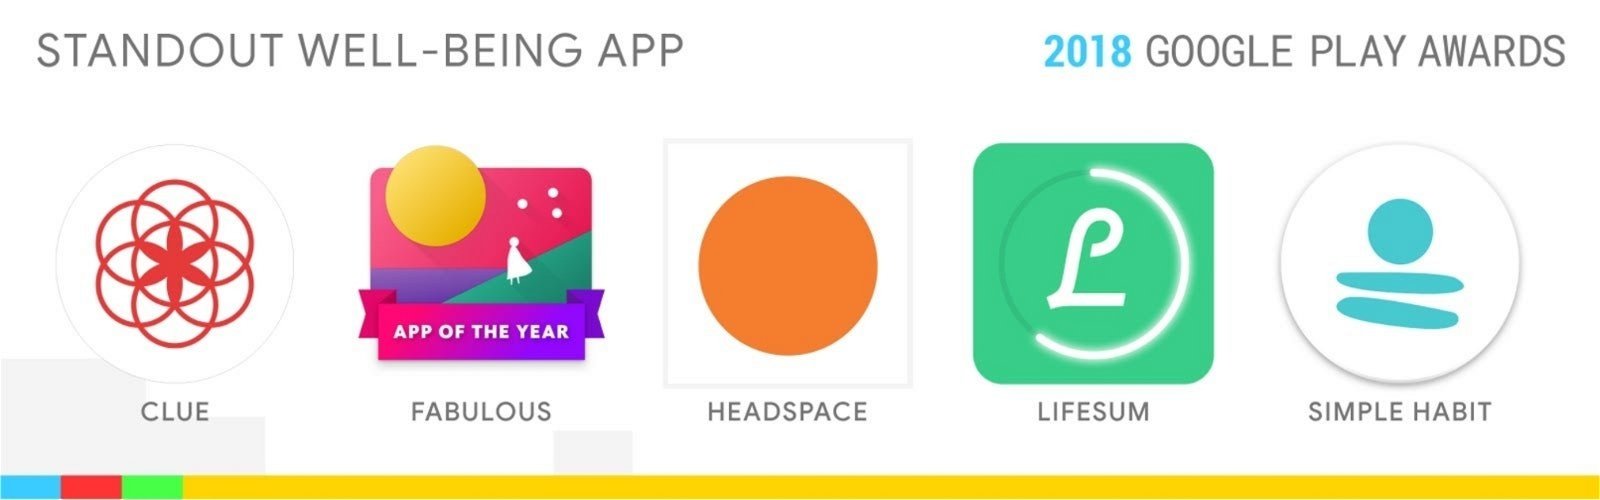 Standout-Well-Being-App